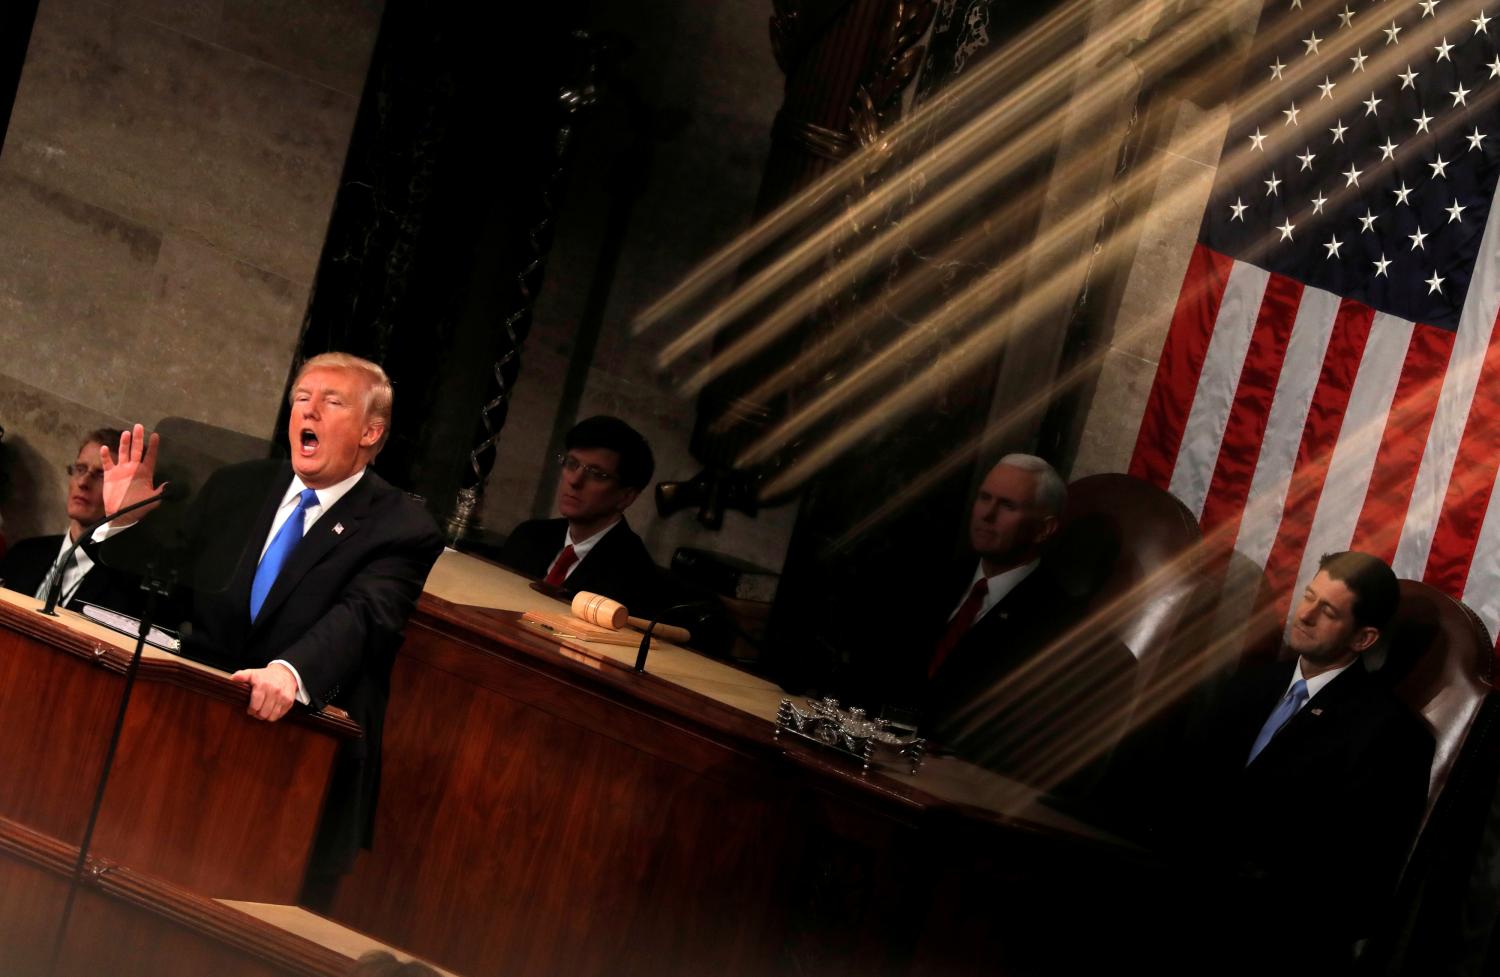 U.S. President Donald Trump and Vice President Mike Pence are seen behind the reflection of a House chamber railing as Trump delivers his State of the Union address to a joint session of the U.S. Congress on Capitol Hill in Washington, U.S., January 30, 2018. Reuters photographer Carlos Barria: "The State of the Union speech is one of the most important political events at the beginning of the year. We usually photograph it from several fixed positions, but this year I was assigned to be the 'rotating' photographer, meaning I could move around on the balcony and shoot from different angles, but only during short windows of time. During one of those windows, I found an interesting play of light reflected off a gold-colored railing, which, at a certain angle, could be seen to fall over the president." REUTERS/Carlos Barria    SEARCH "TRUMP POY" FOR FOR THIS STORY. SEARCH "REUTERS POY" FOR ALL BEST OF 2018 PACKAGES. TPX IMAGES OF THE DAY. - RC19E32723F0